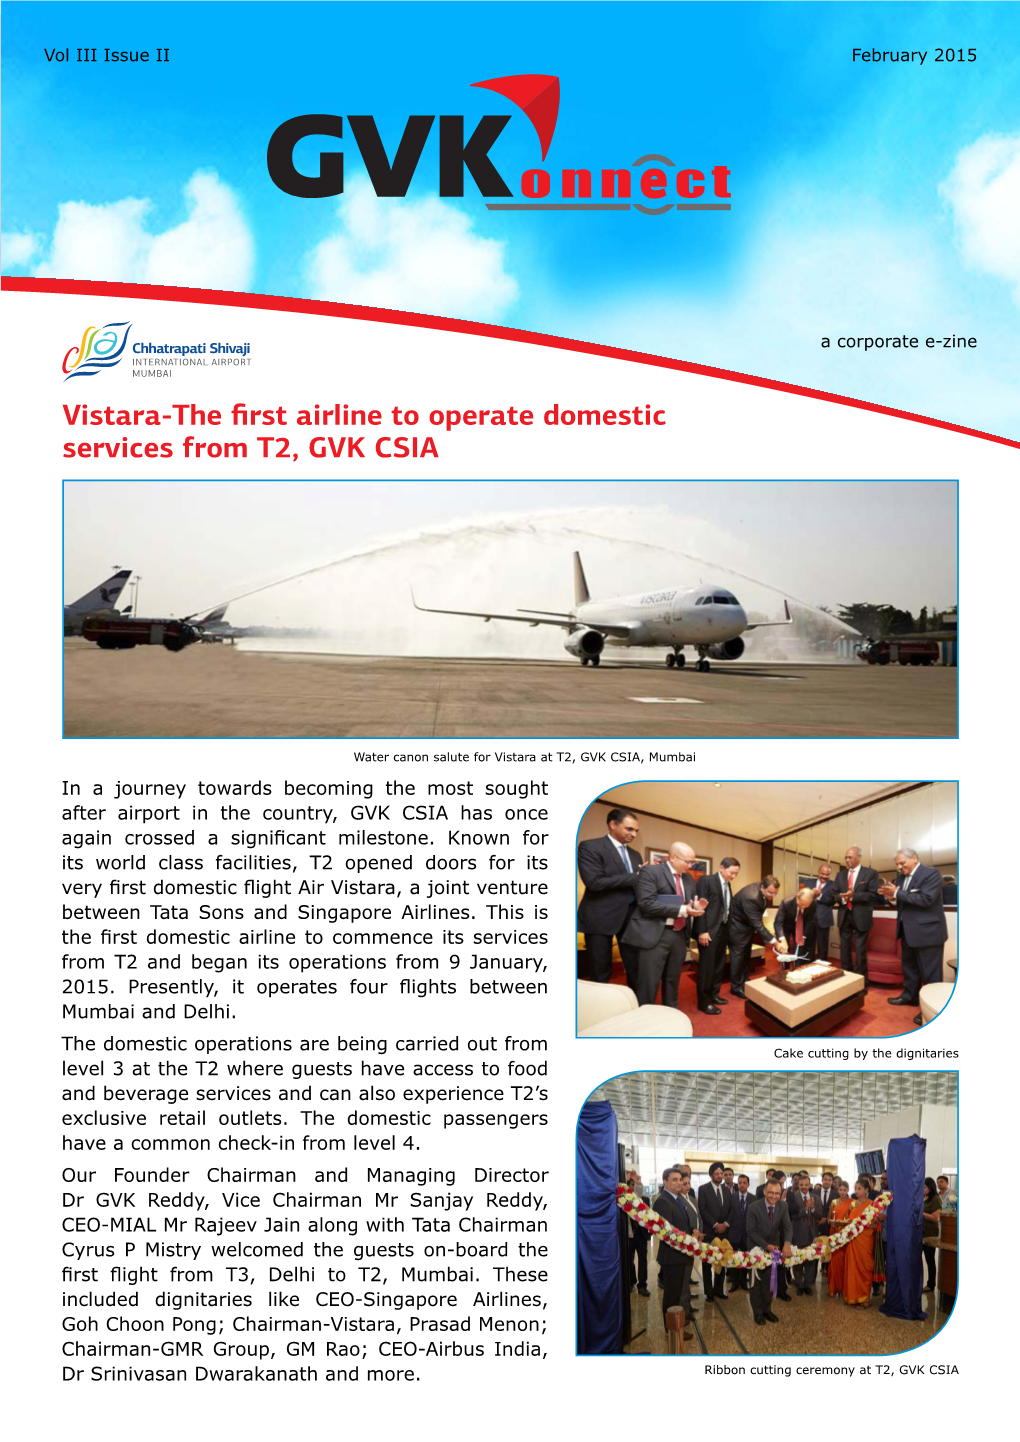 Vistara-The First Airline to Operate Domestic Services from T2, GVK CSIA